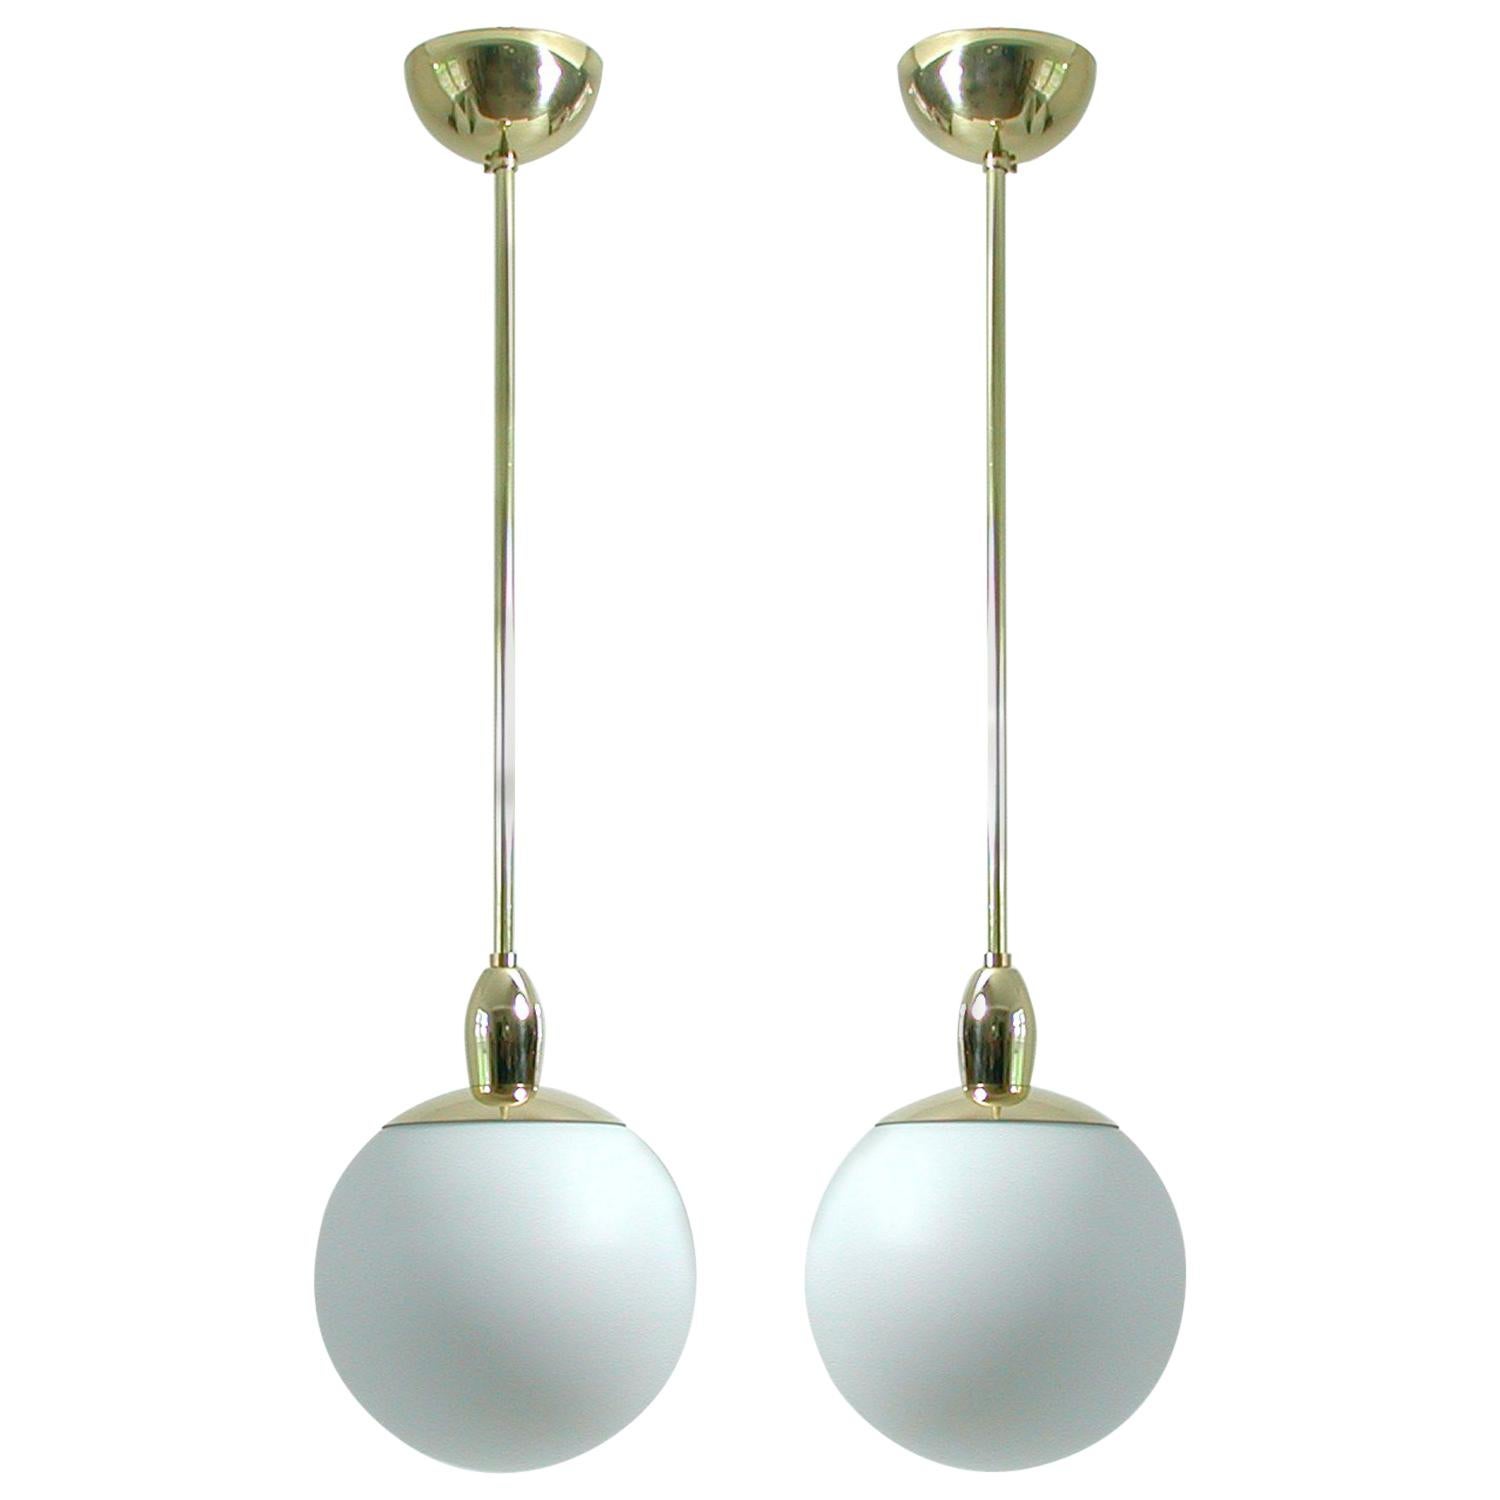 Pair of Mid-Century Modern Italian Satinated Glass and Brass Pendants, 1960s For Sale